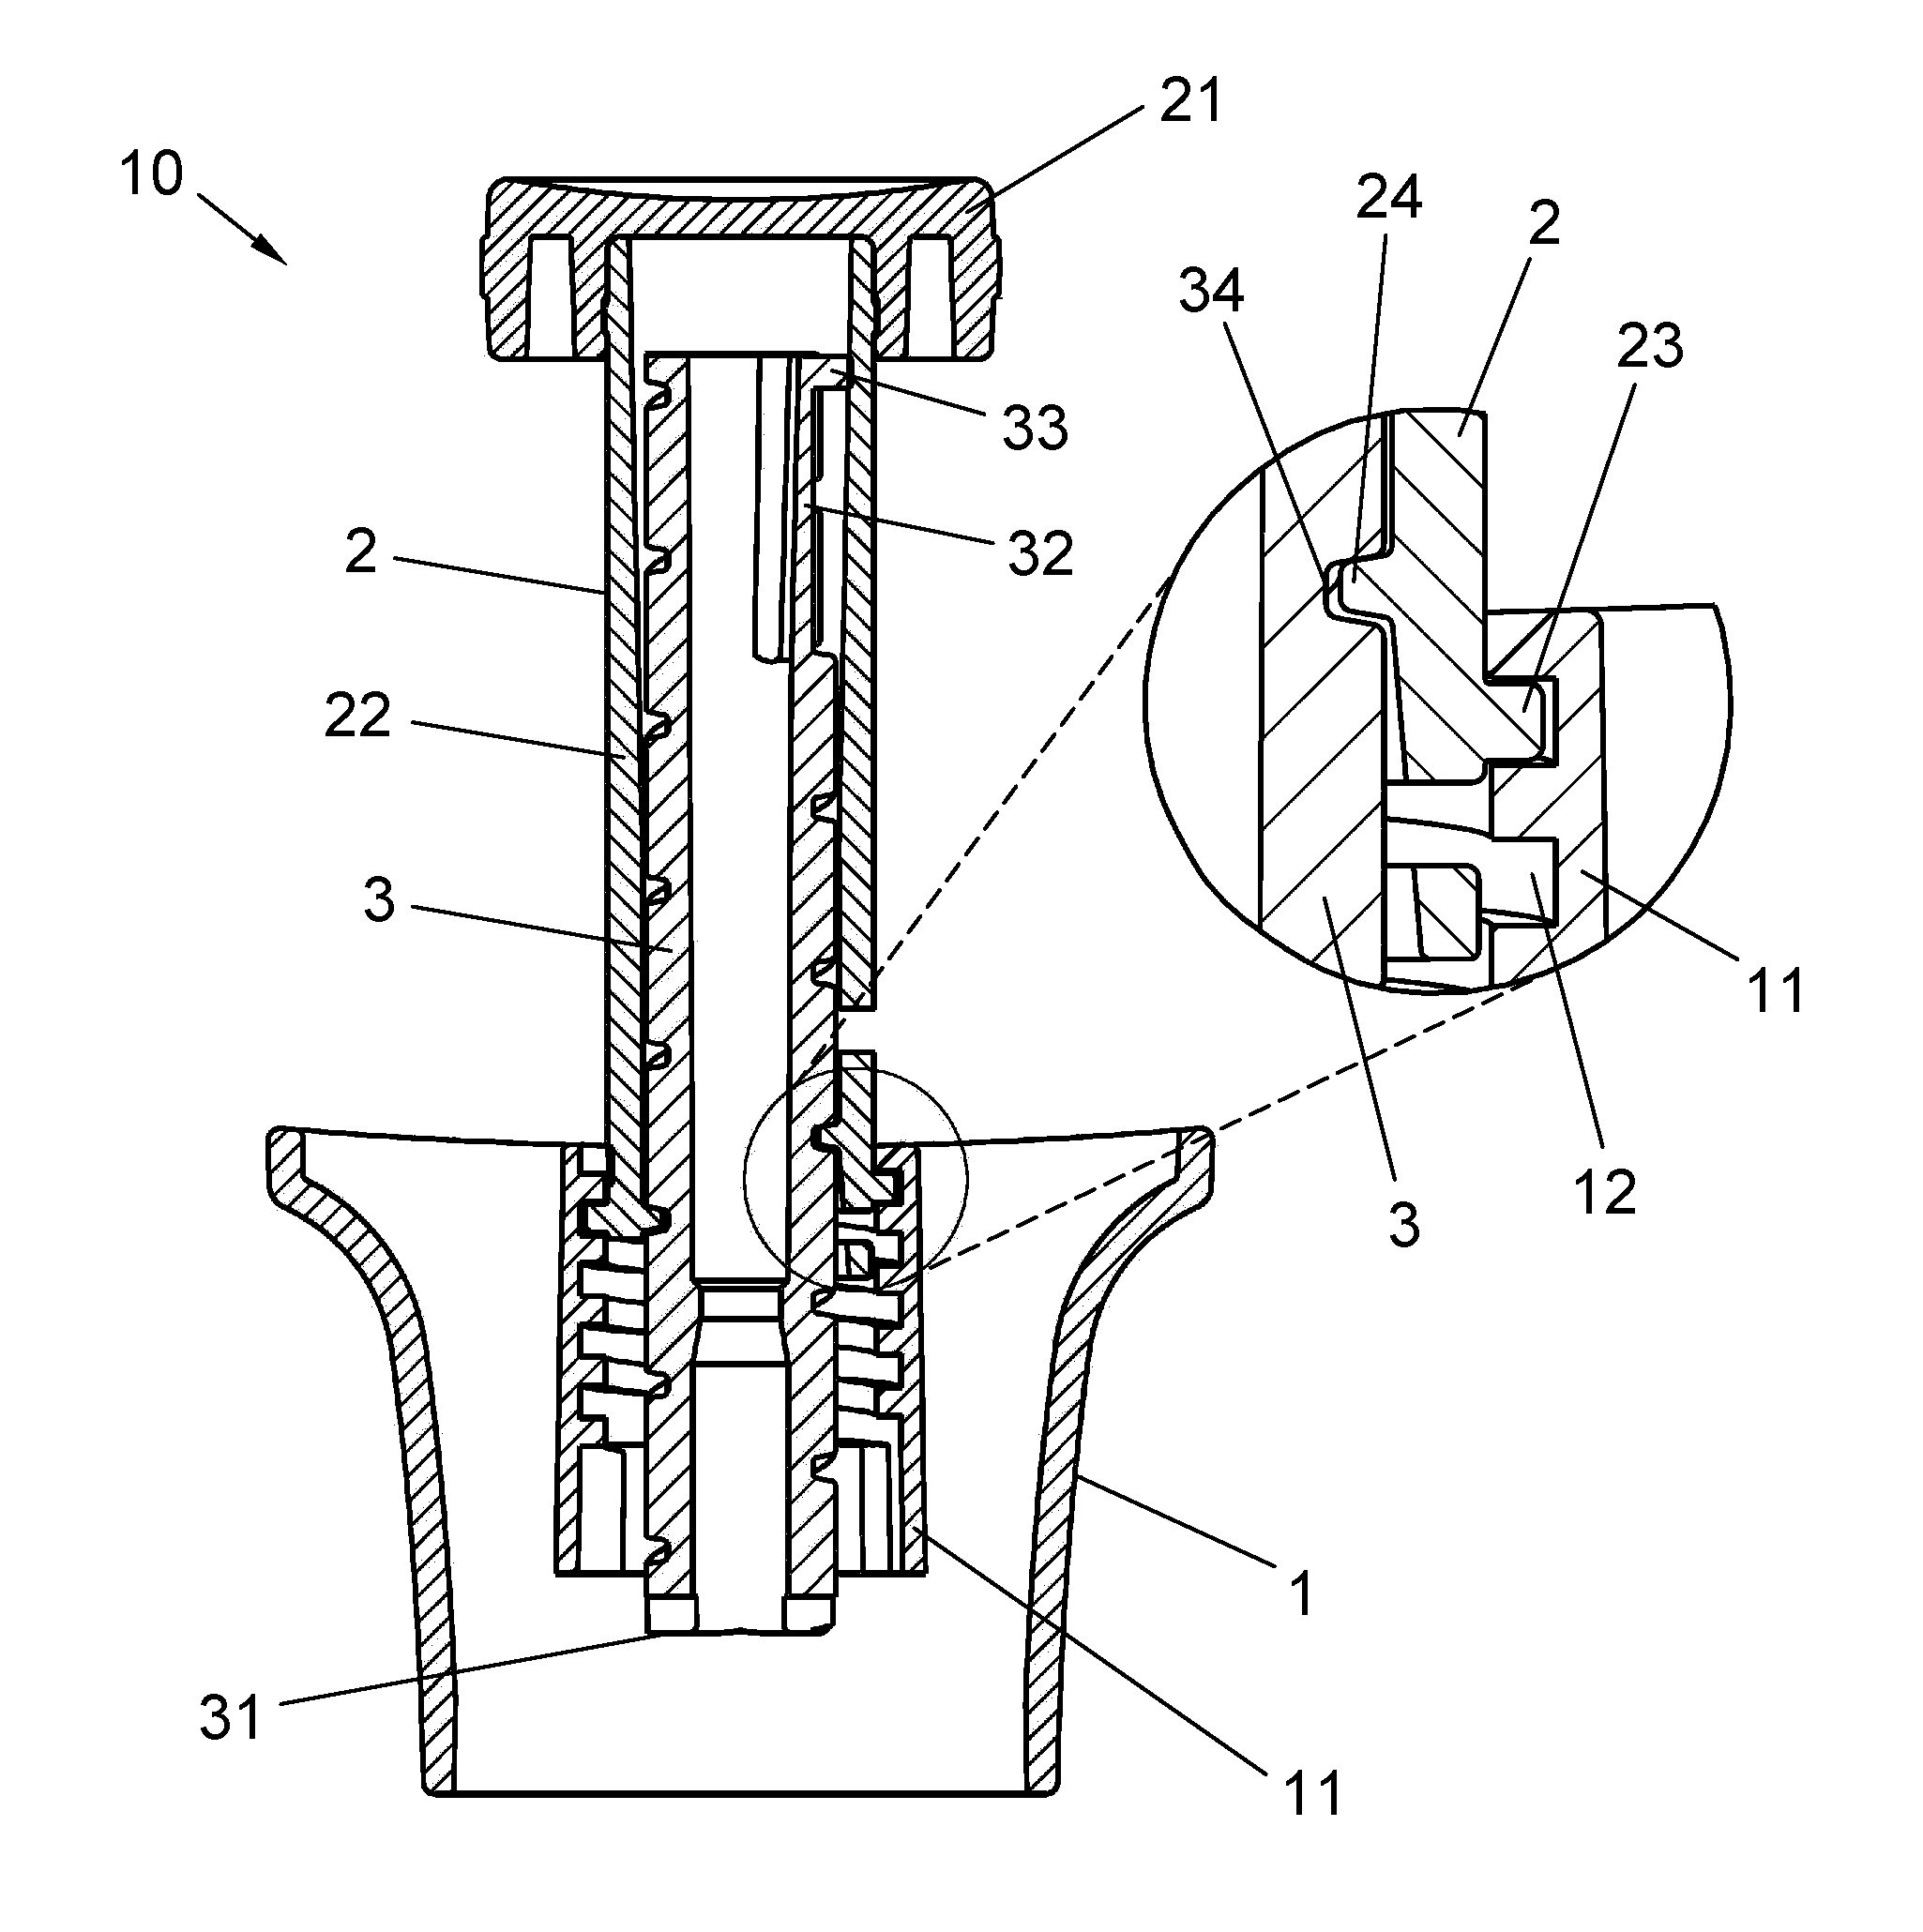 Piston Rod Drive System for a Drug Delivery Device